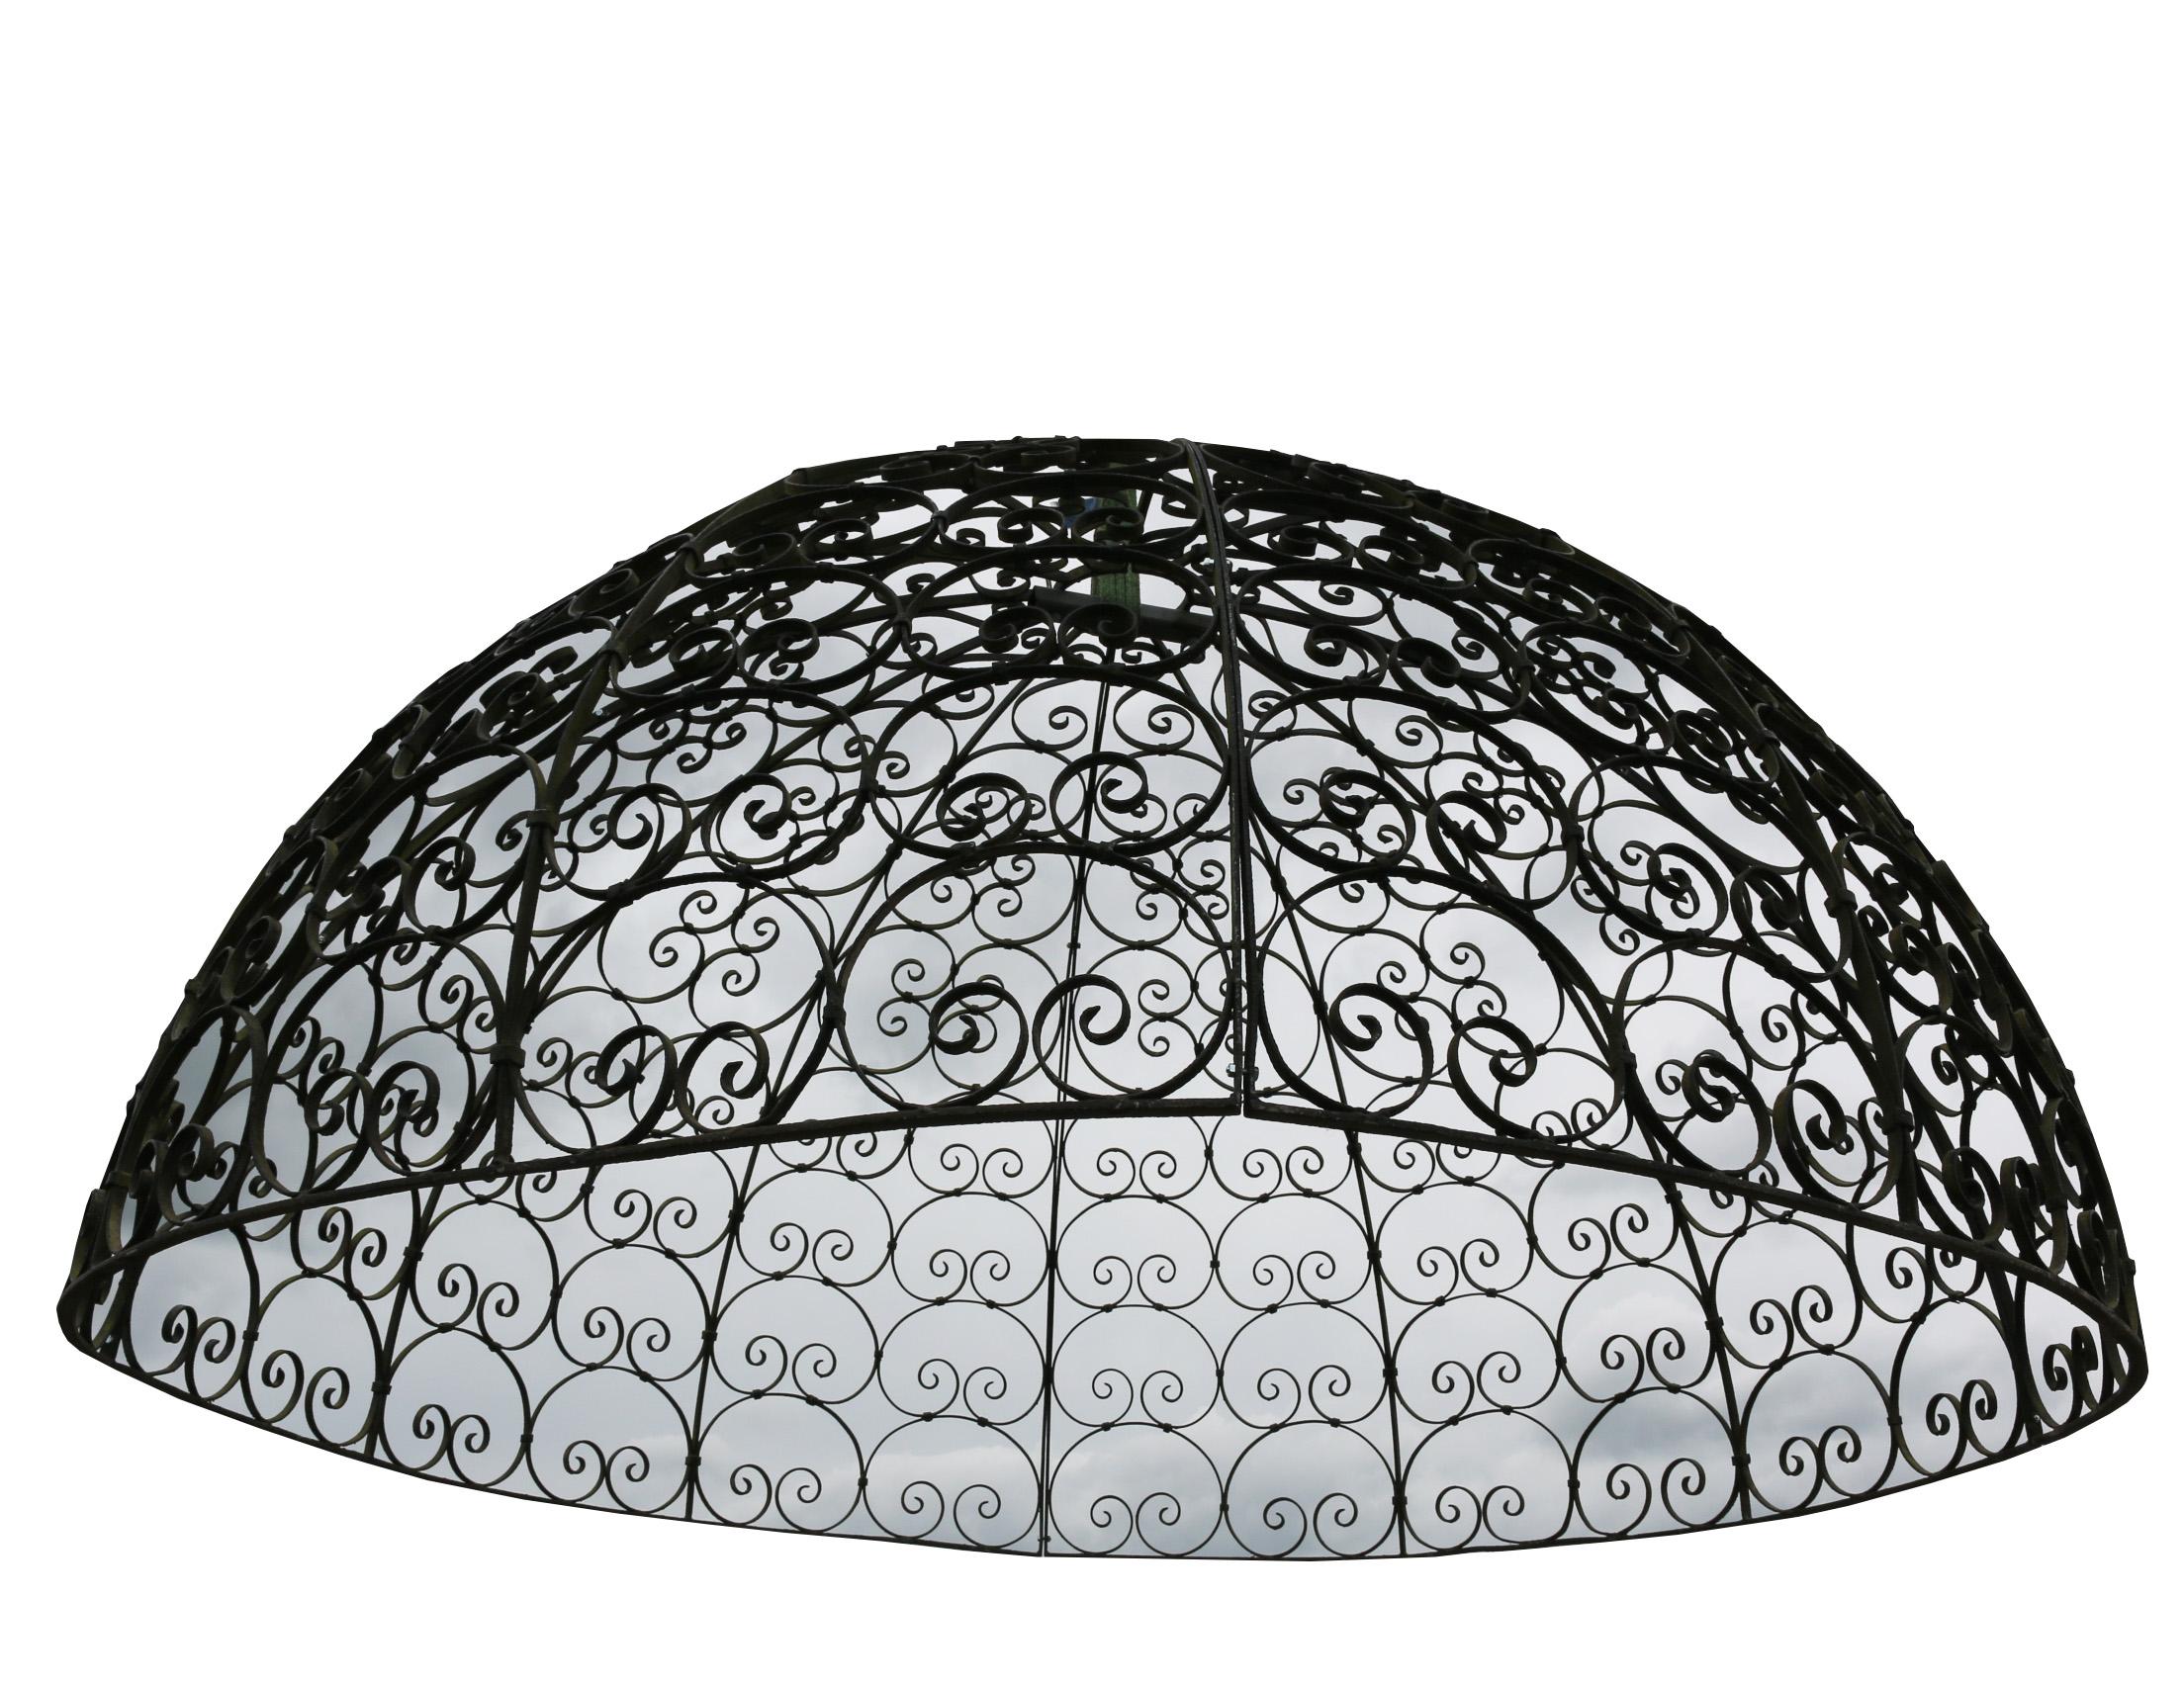 A good quality wrought iron domed roof structure, originally part of a stone rotunda. Reclaimed from a property in Sunningdale.